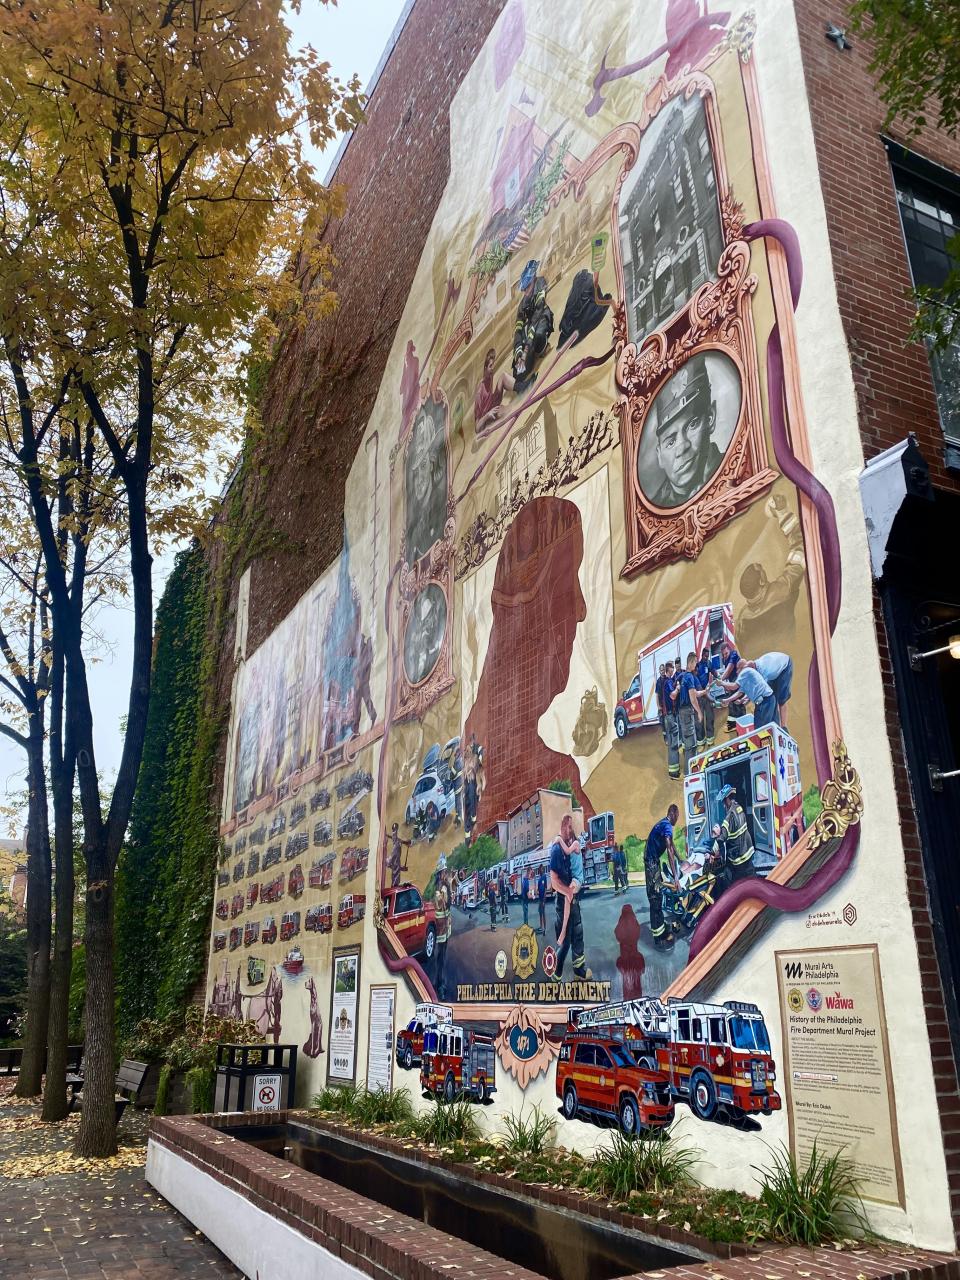 Philadelphia is home to the first volunteer fire company of its kind, and it was founded by Benjamin Franklin. This mural in Old Historic Town memorializes the founder and was available for pedestrians to look at on Oct. 28, 2022. | Sarah Gambles, Deseret News